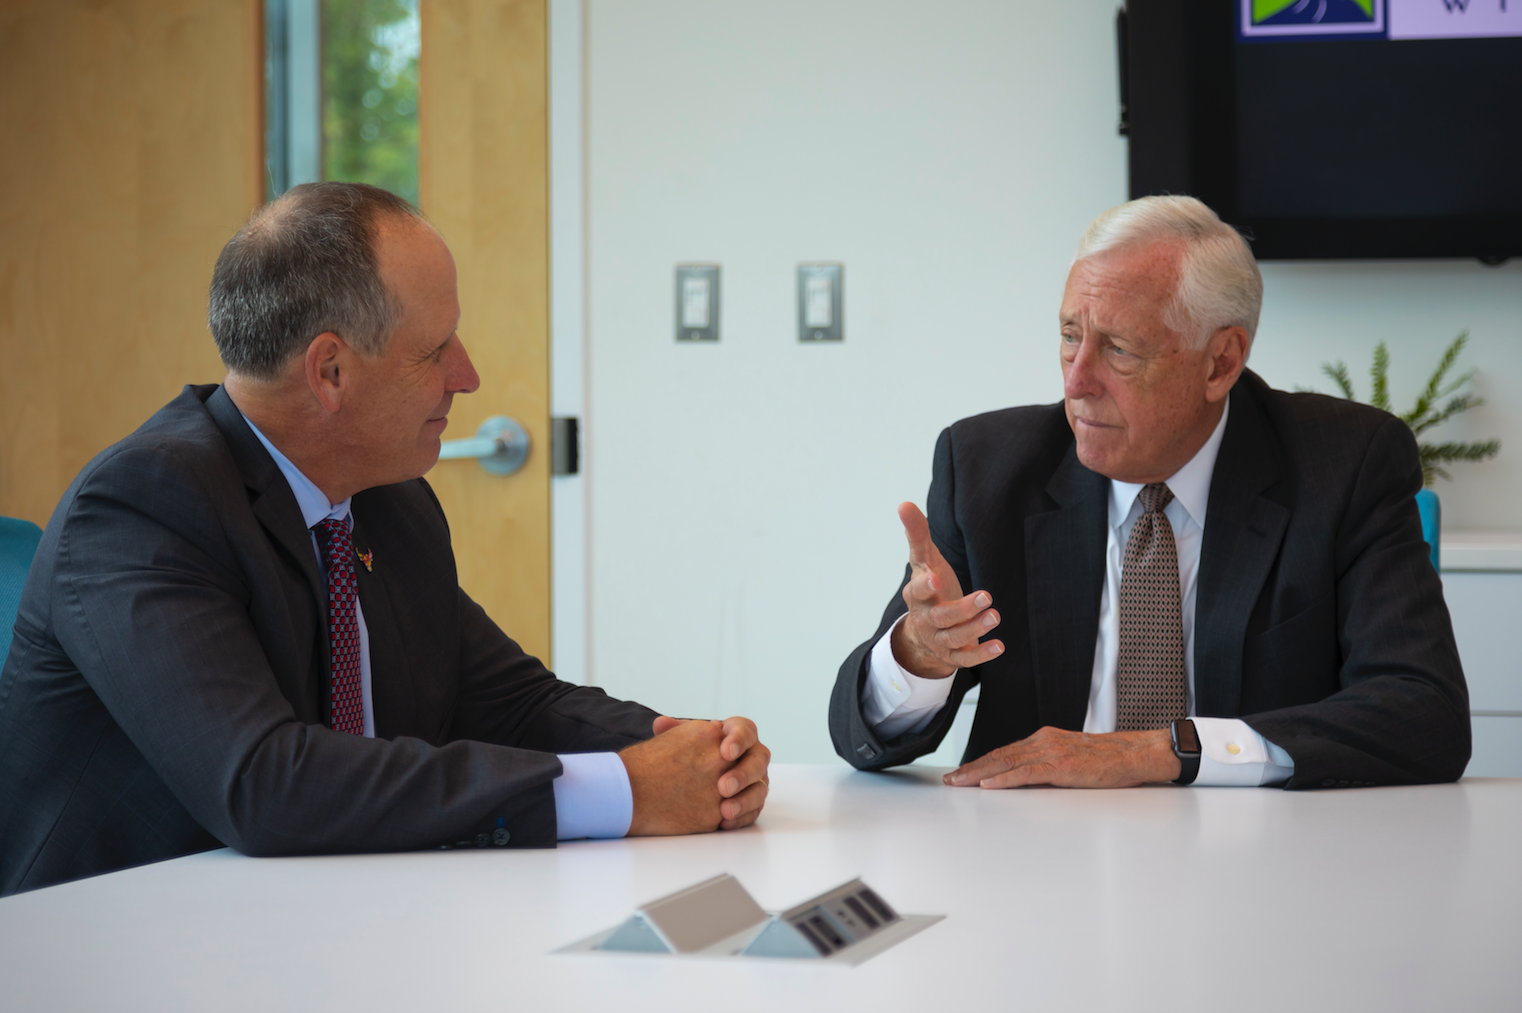 Congressman Steny Hoyer and Thompson Creek Window Company President Rick Wuest discuss how government and business can work together to promote manufacturing in America.